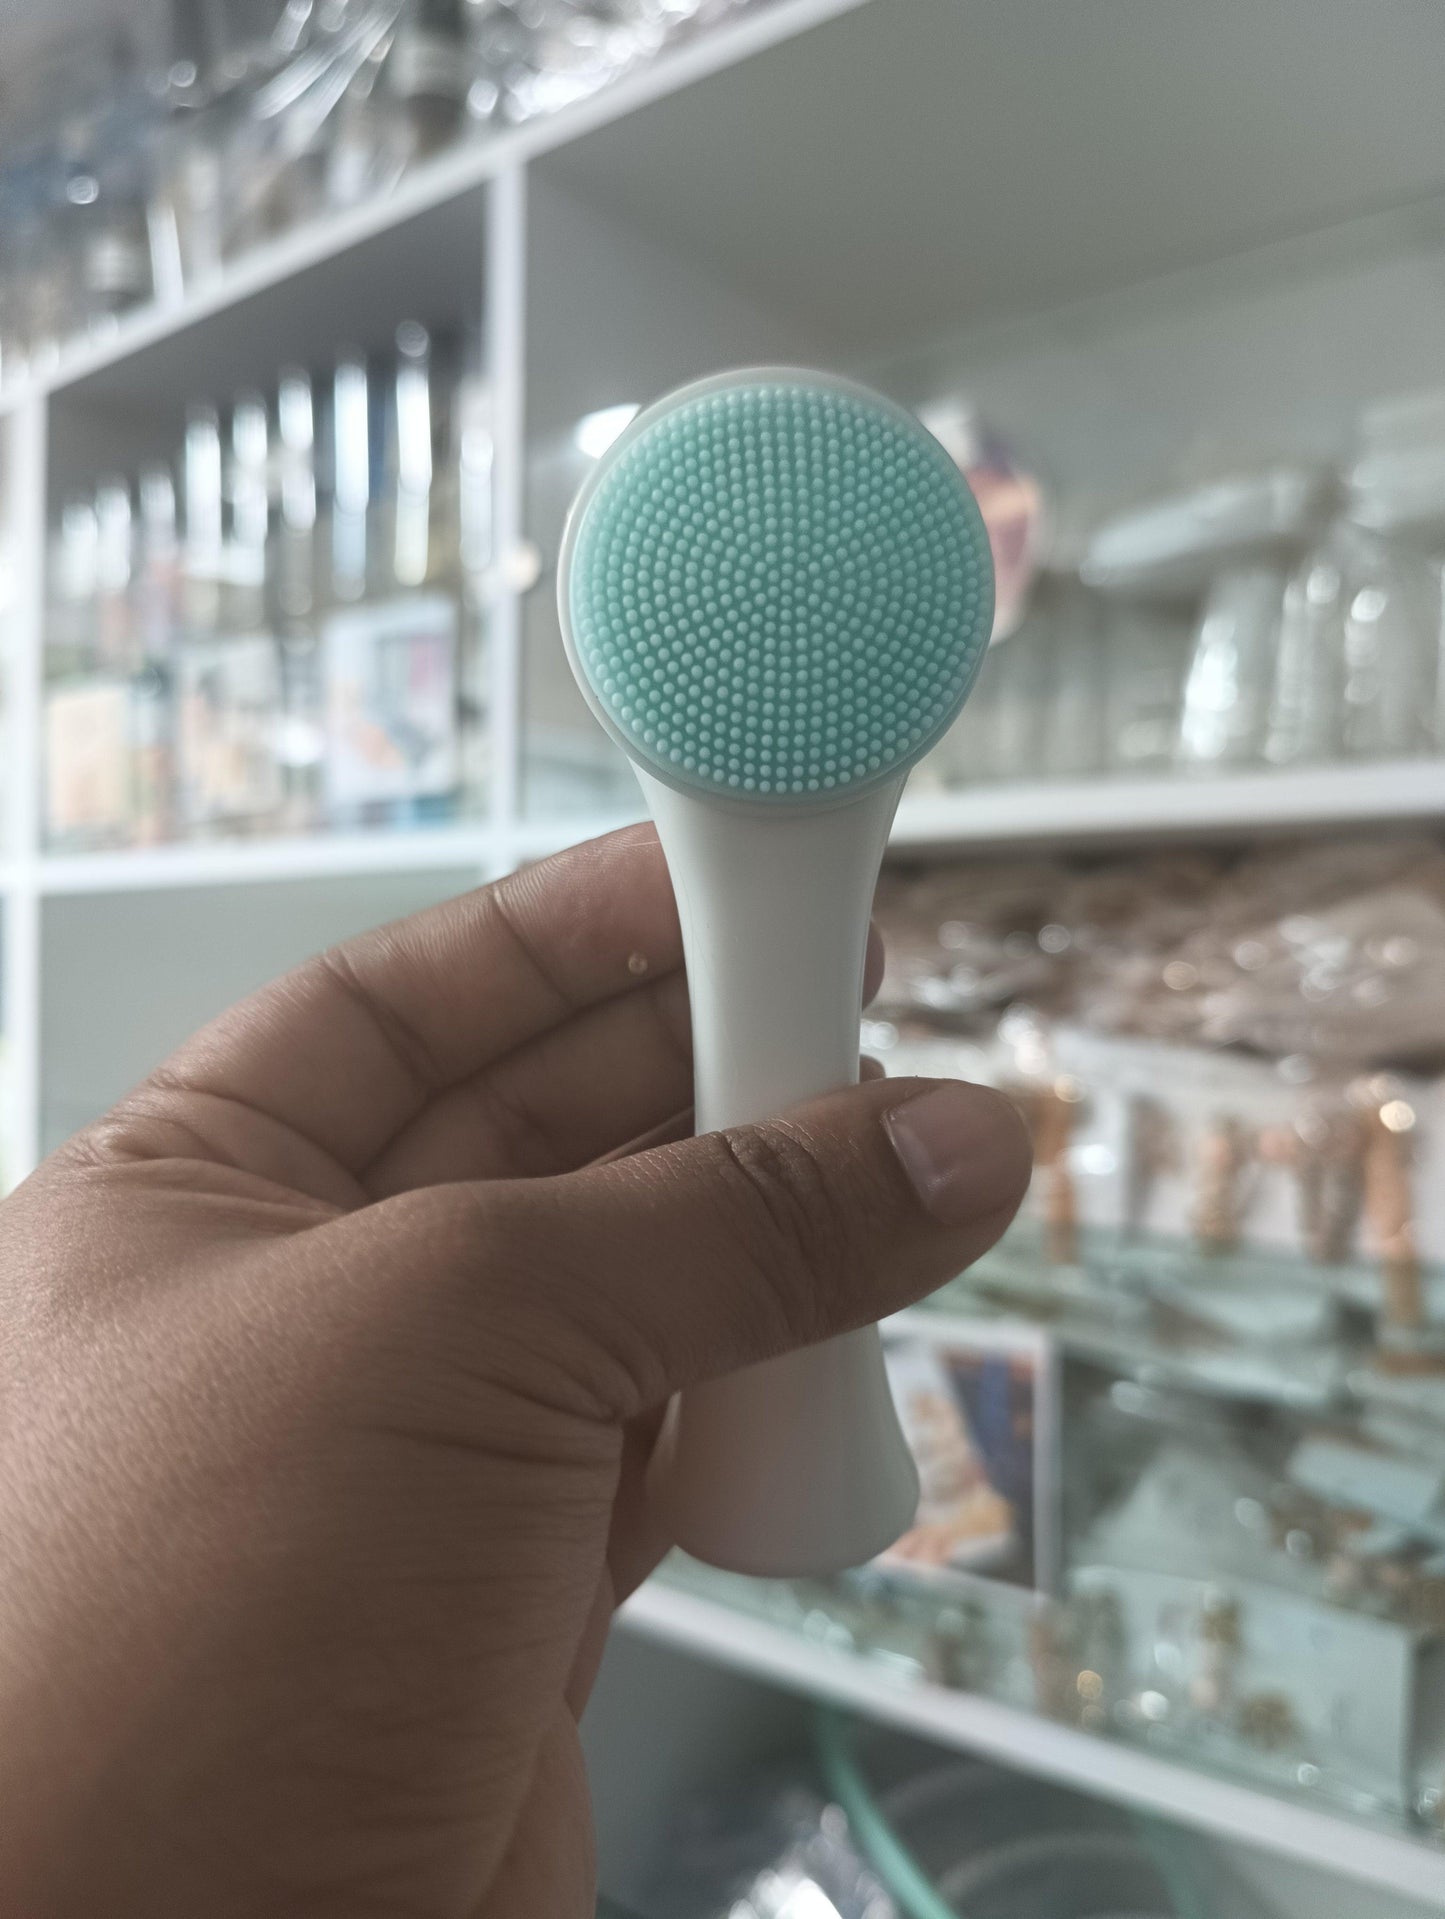 Silicone Facial Cleanser Brush - HT Bazar